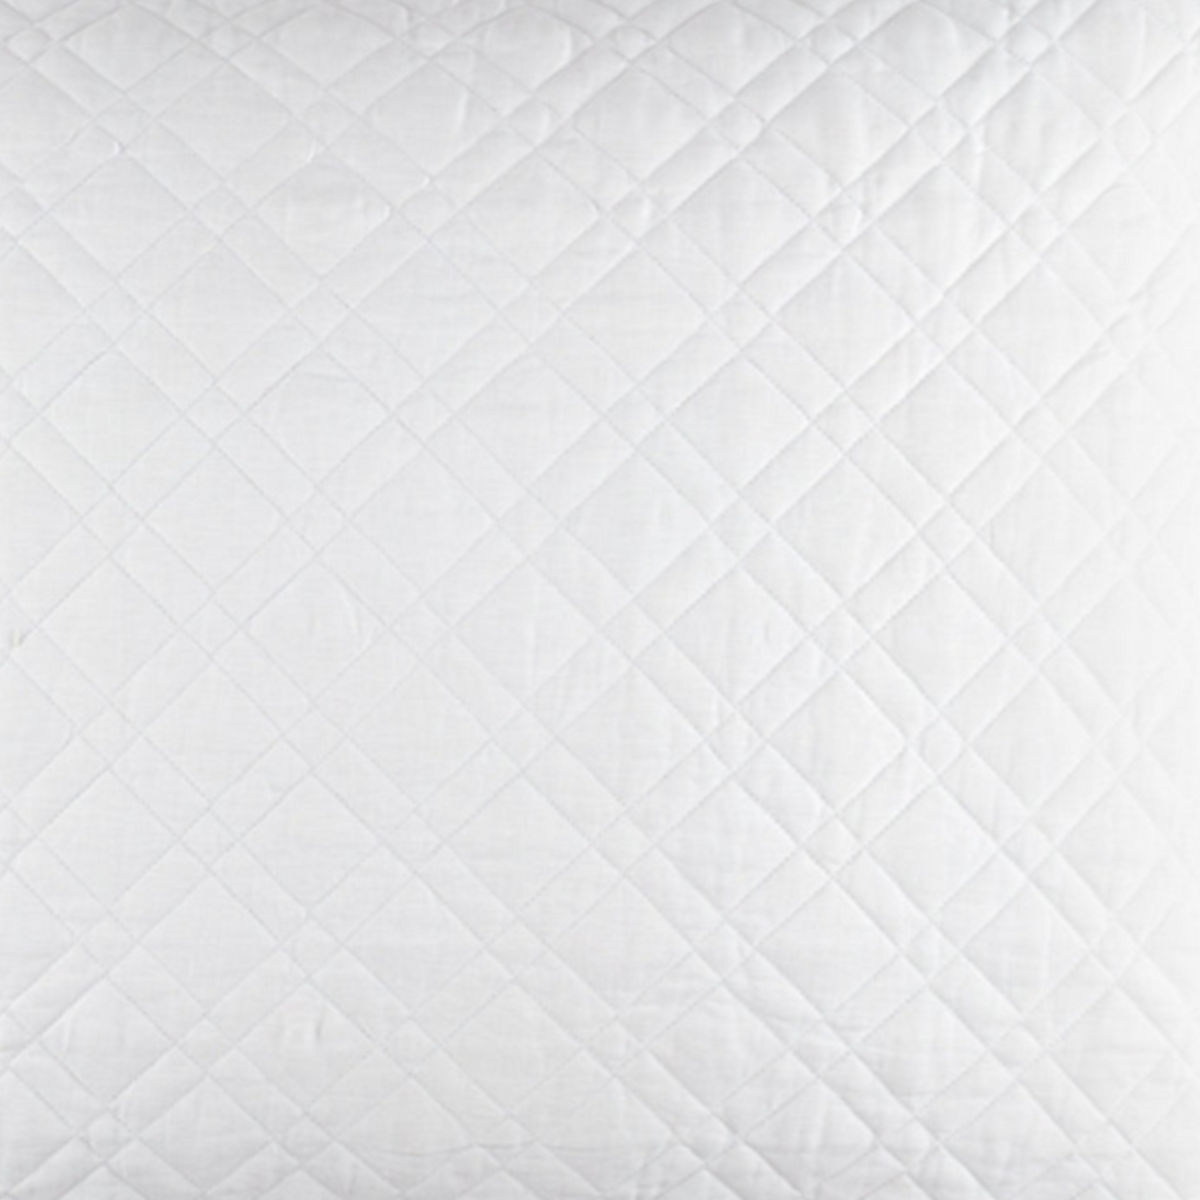 Swatch Sample of Pine Cone Hill Washed Linen Quilted Bedding in White Color